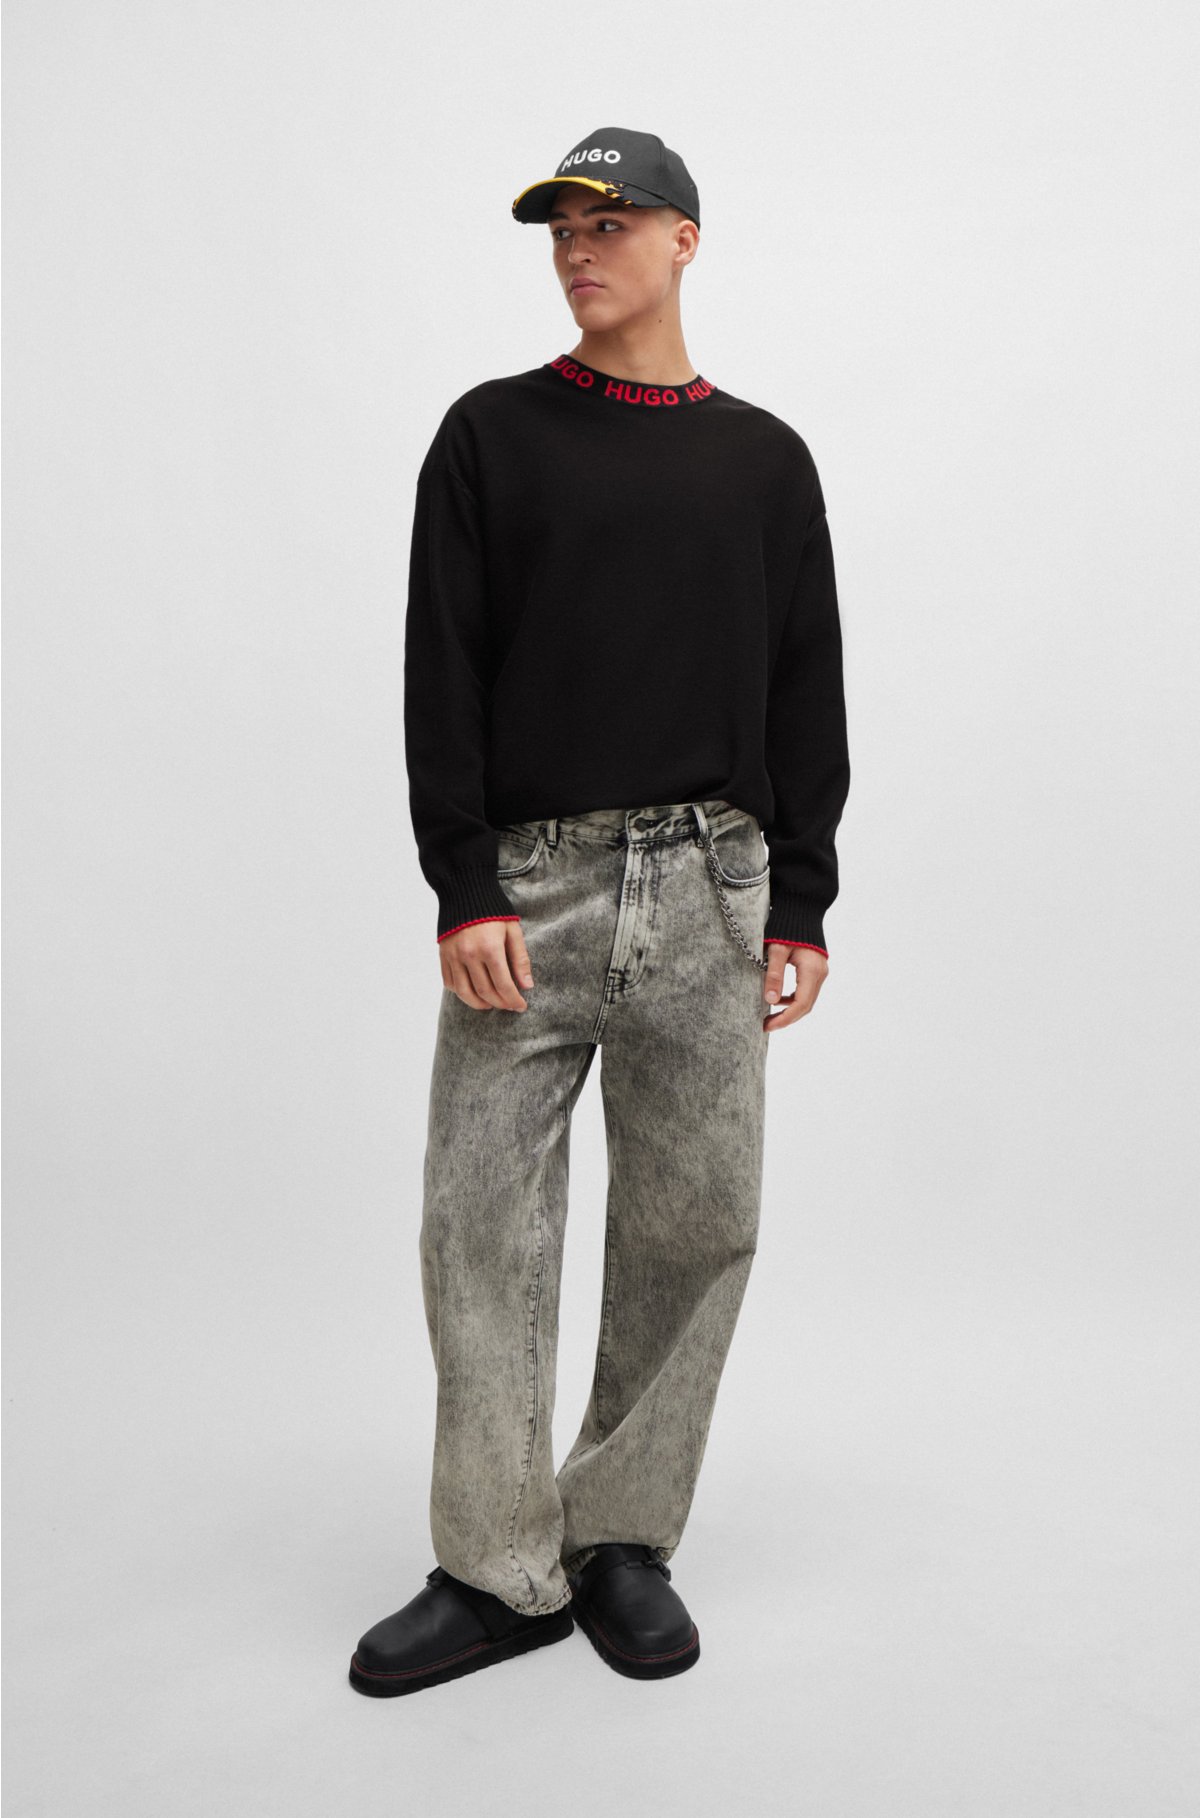 HUGO - Oversize-fit sweater in with logo collar